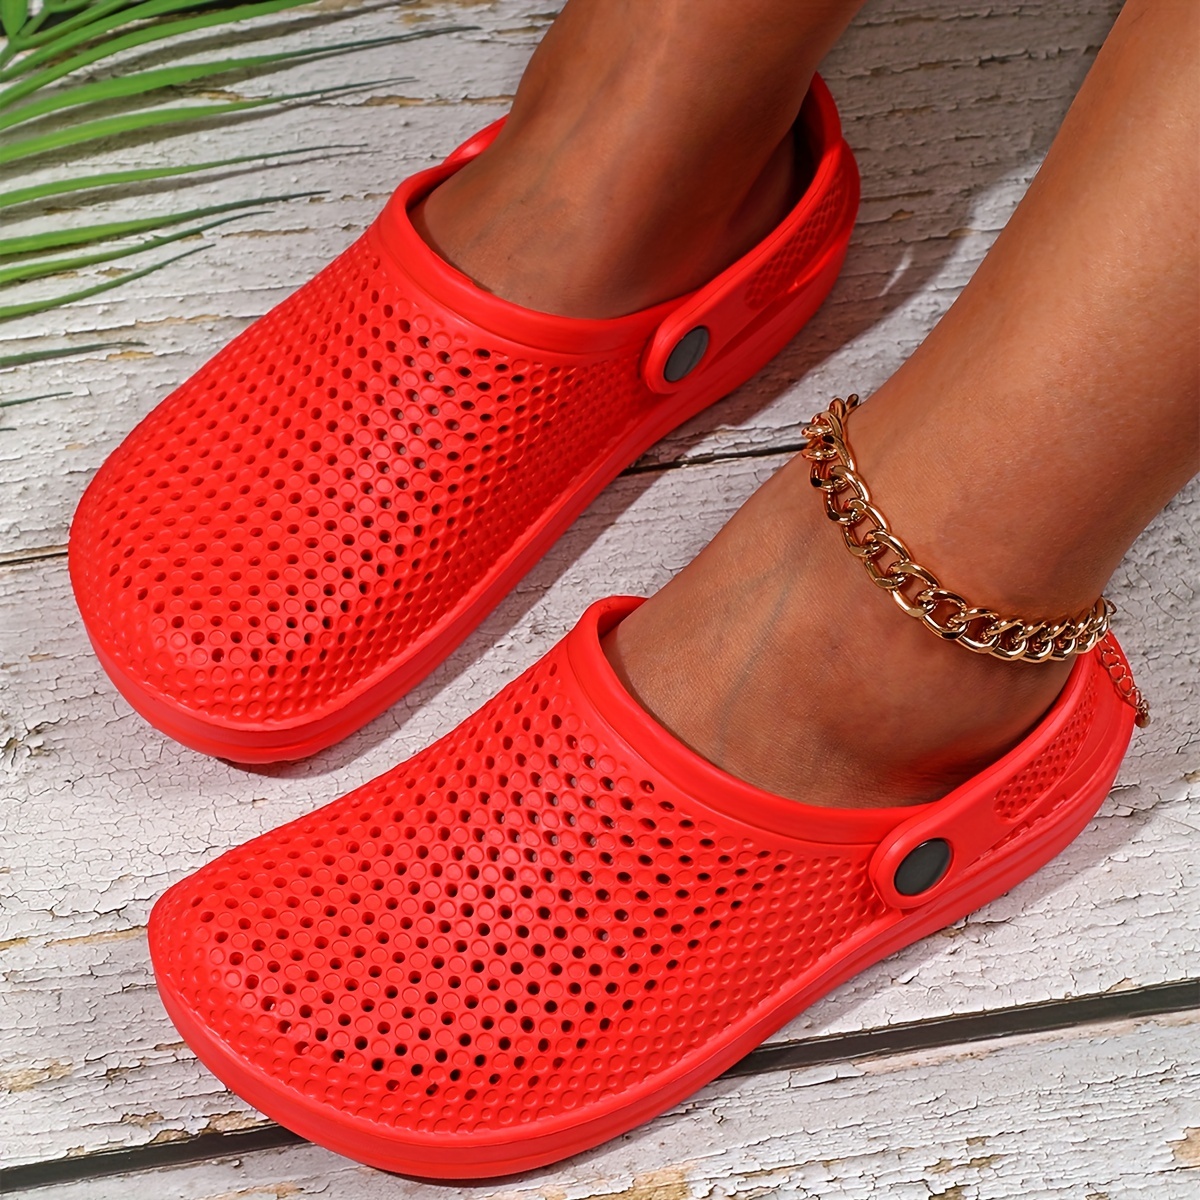 Women’s Casual Garden Clogs, Solid Color Hollow Out Closed Toe Slip On Shoes, Casual Outdoor Beach Sandals